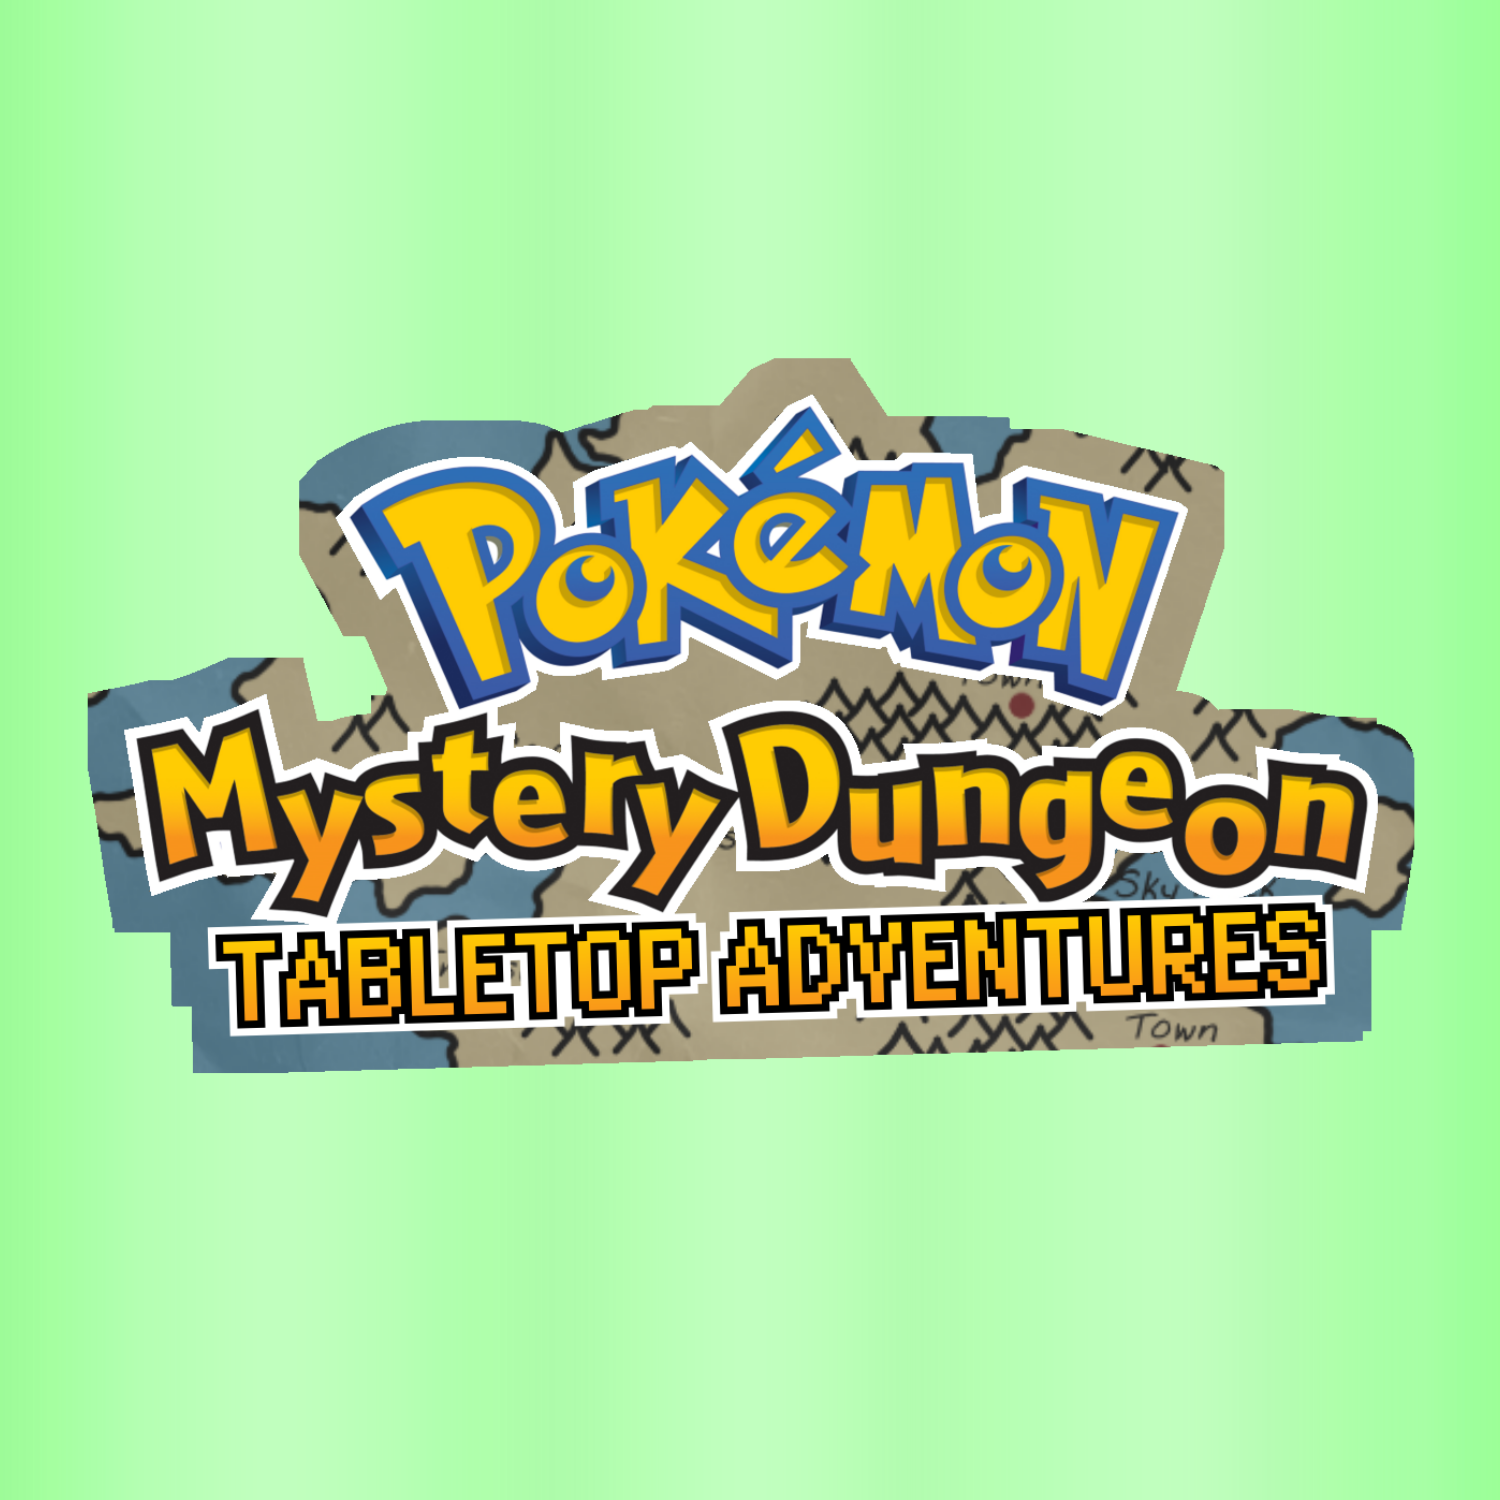 Pokémon Mystery Dungeon: Tabletop Adventures by alimakesrpgs